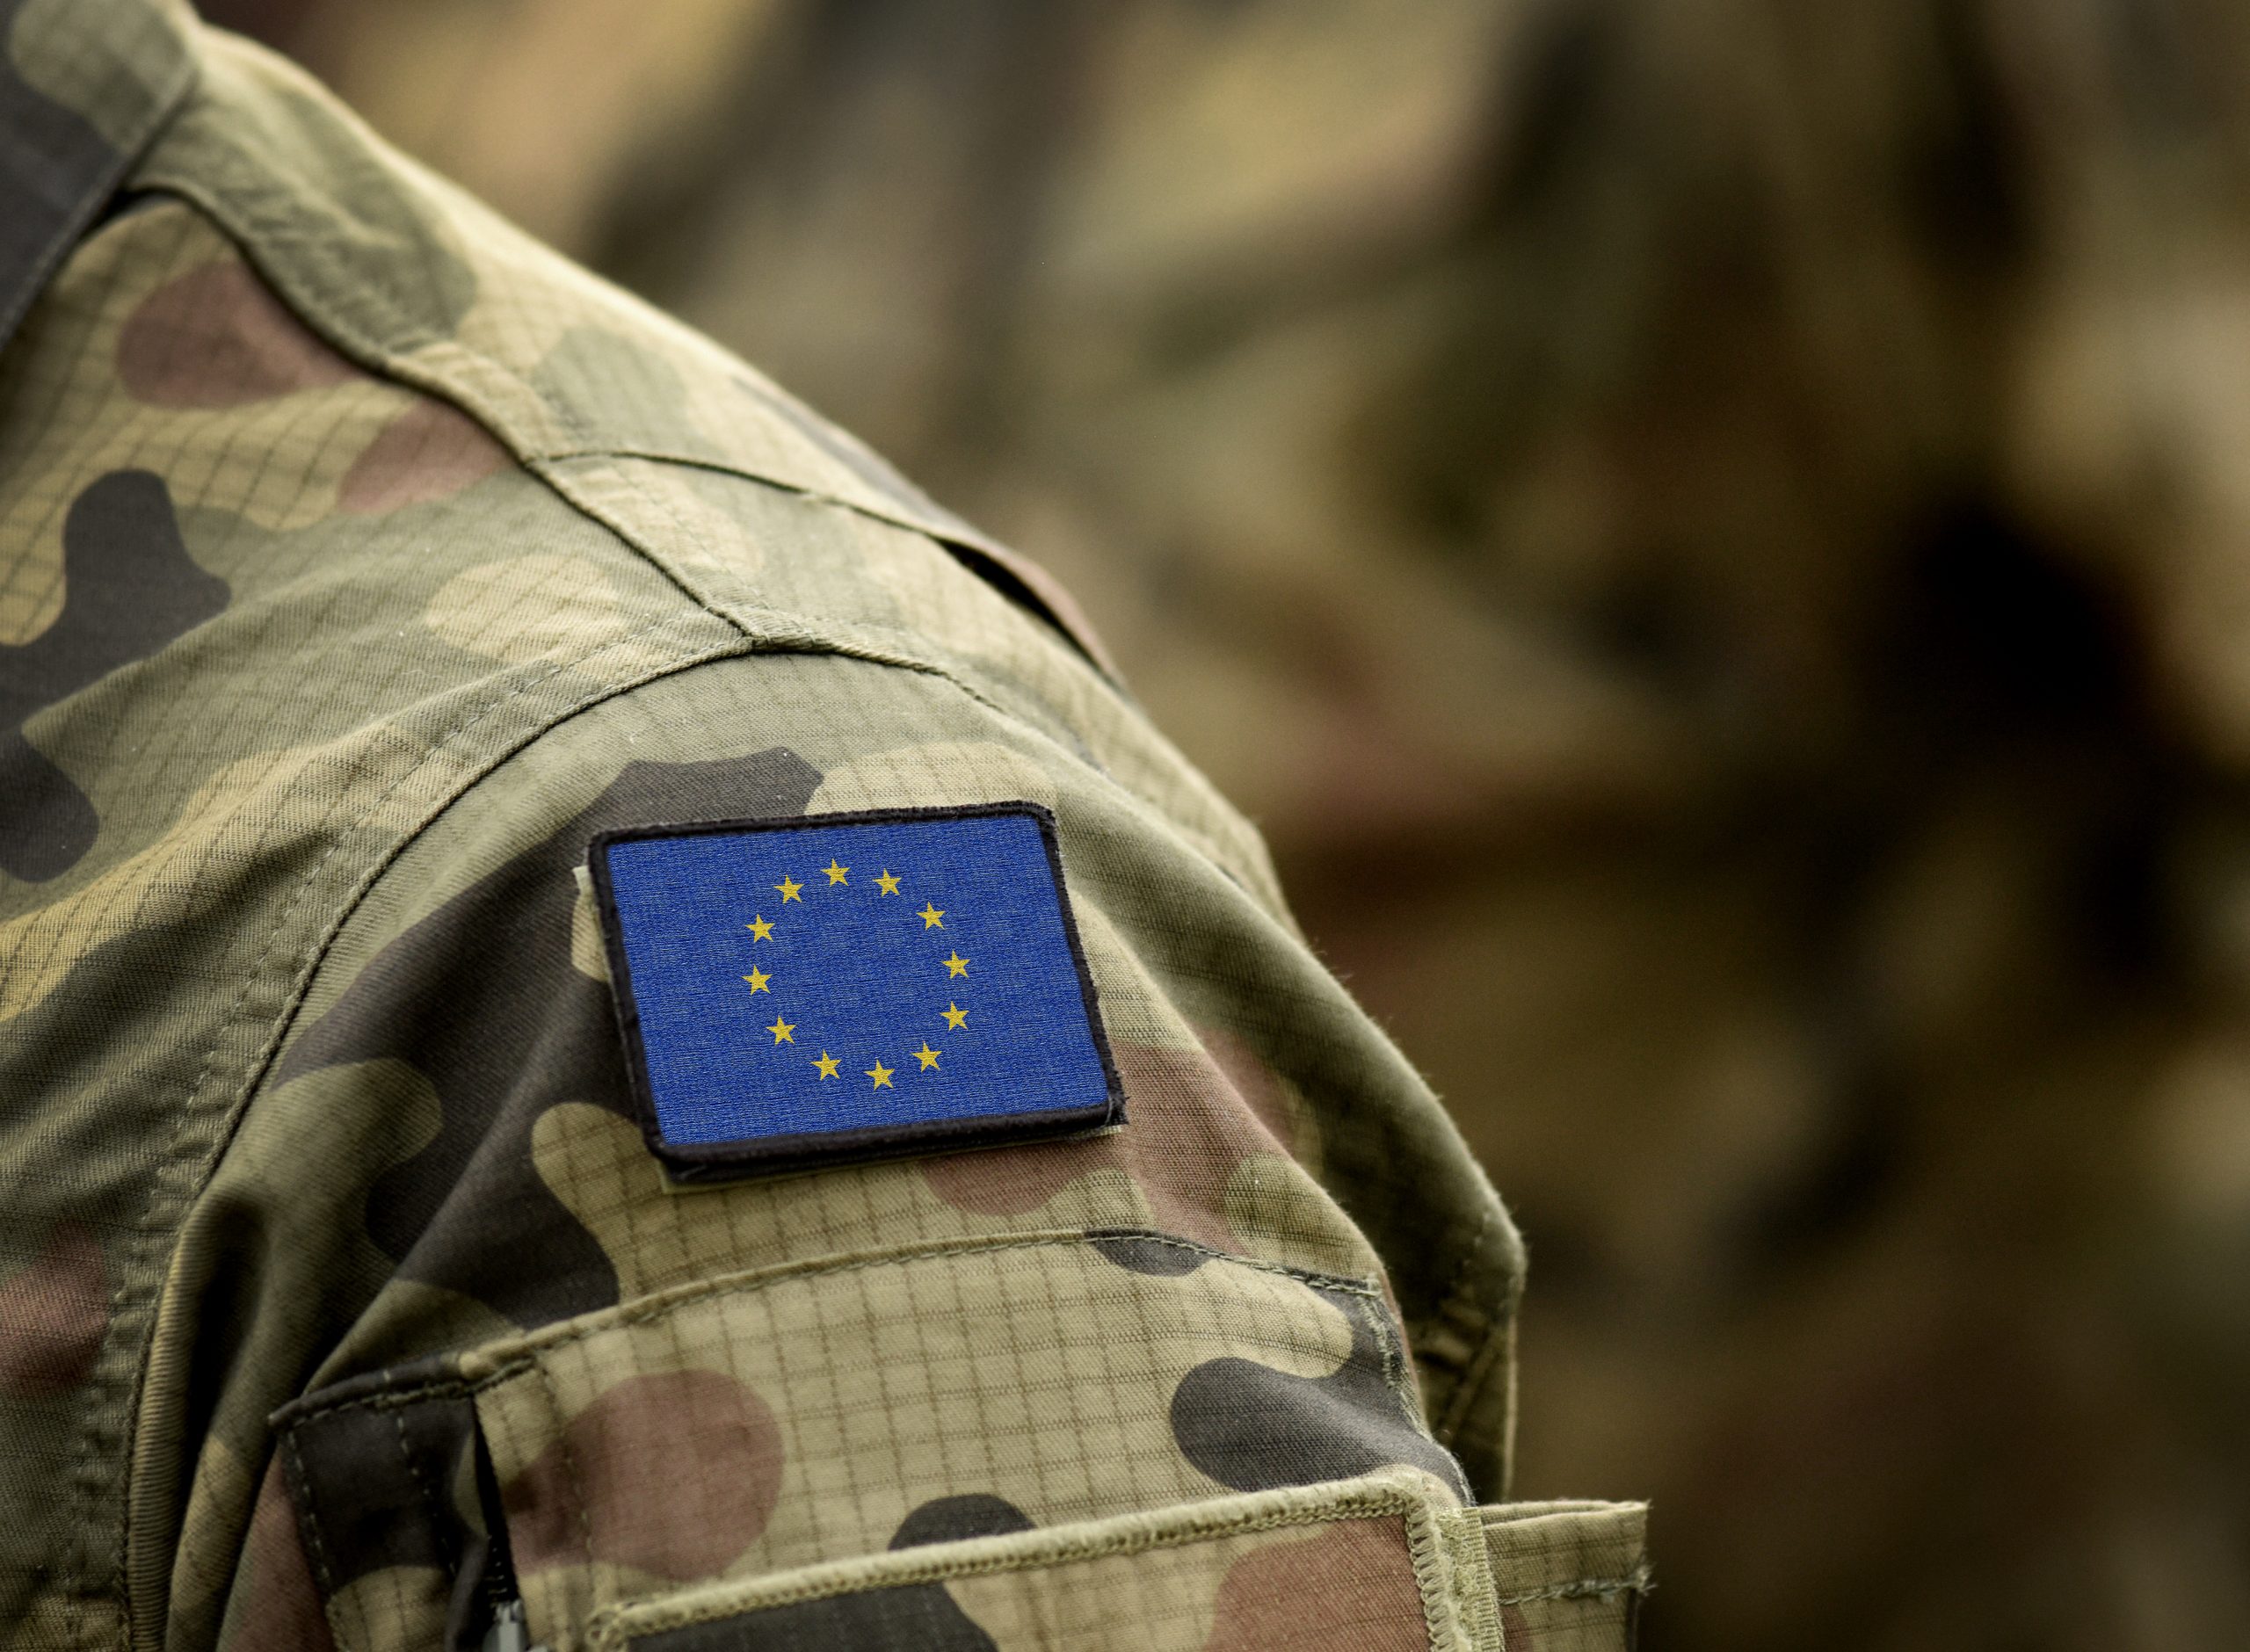 The EU Army is on the horizon